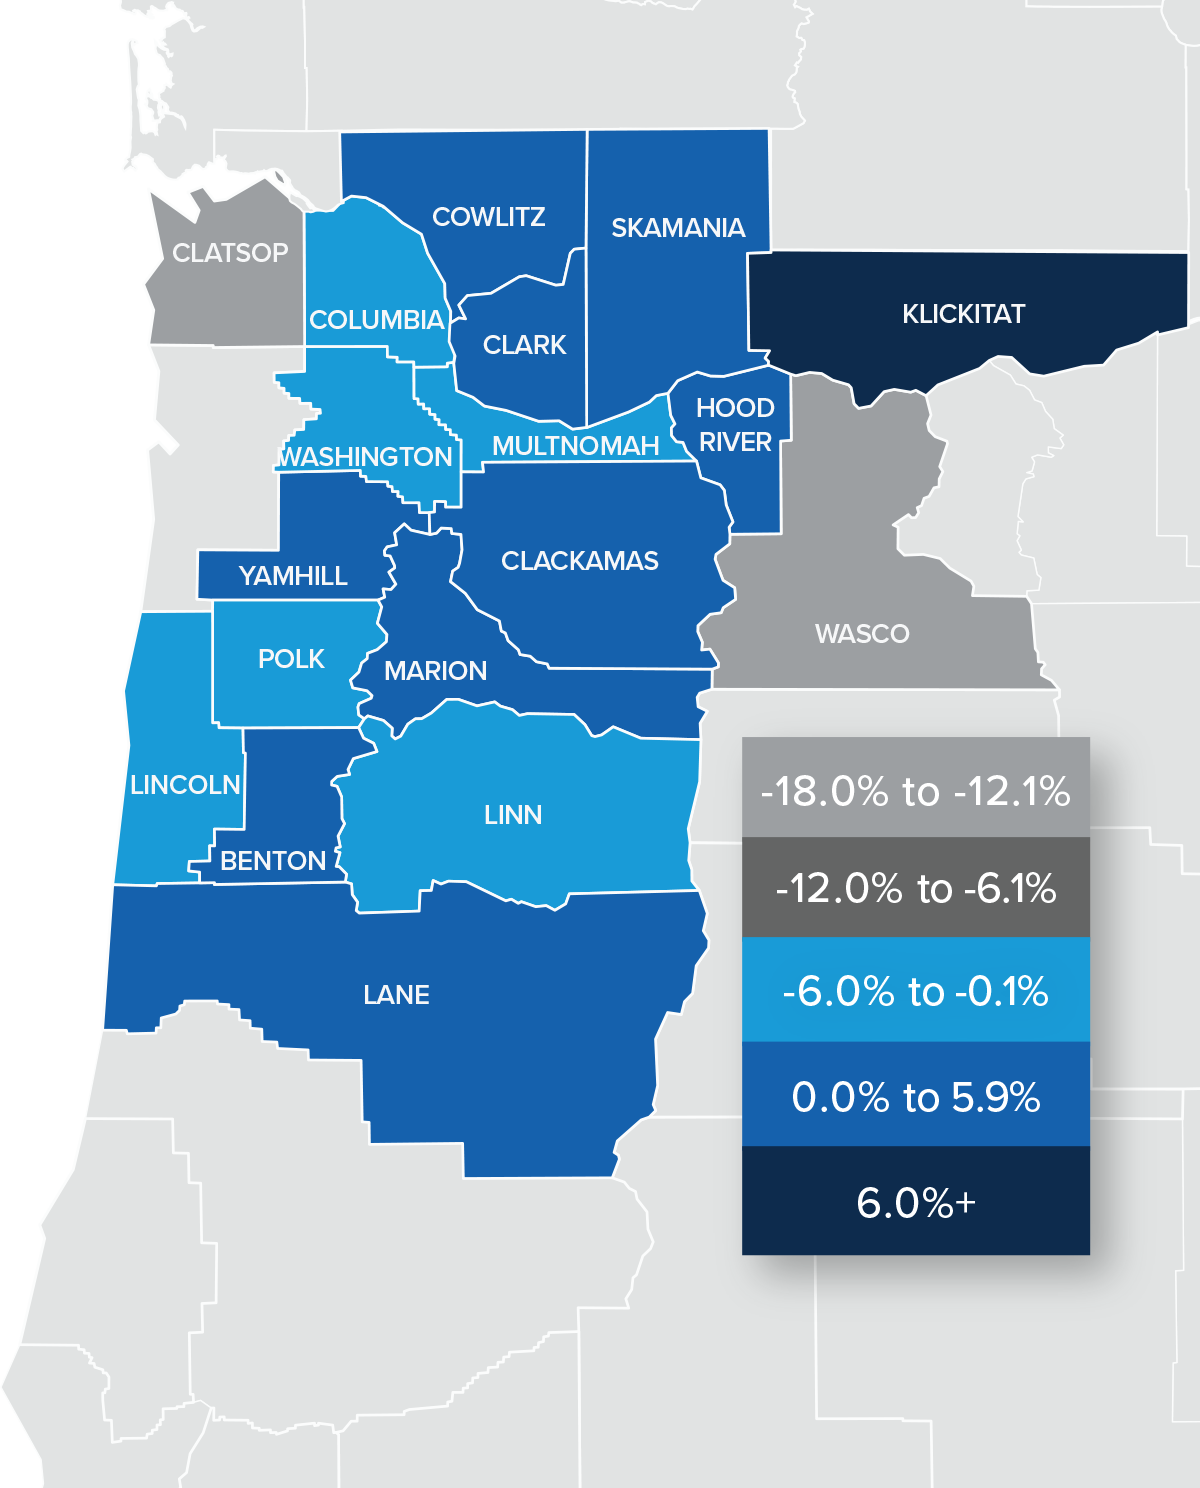 A map showing the real estate home prices percentage changes for various counties in Northwest Oregon and Southwest Washington. Different colors correspond to different tiers of percentage change. Klickitat had percentage change above 6% and is represented in the corresponding navy color. Cowlitz, Skamania, Clackamas, Lane, Yamhill, Clark, Benton, Maroon, and Hood River Counties were in the 0-5.9% range. Polk, Washington, Linn, Multnomah, Lincoln, and Columbia were in the -6% to -0.1% range. Clatsop and Wasco Counties were in the -18 to -12.1% range and were represented in the light grey color on the map.